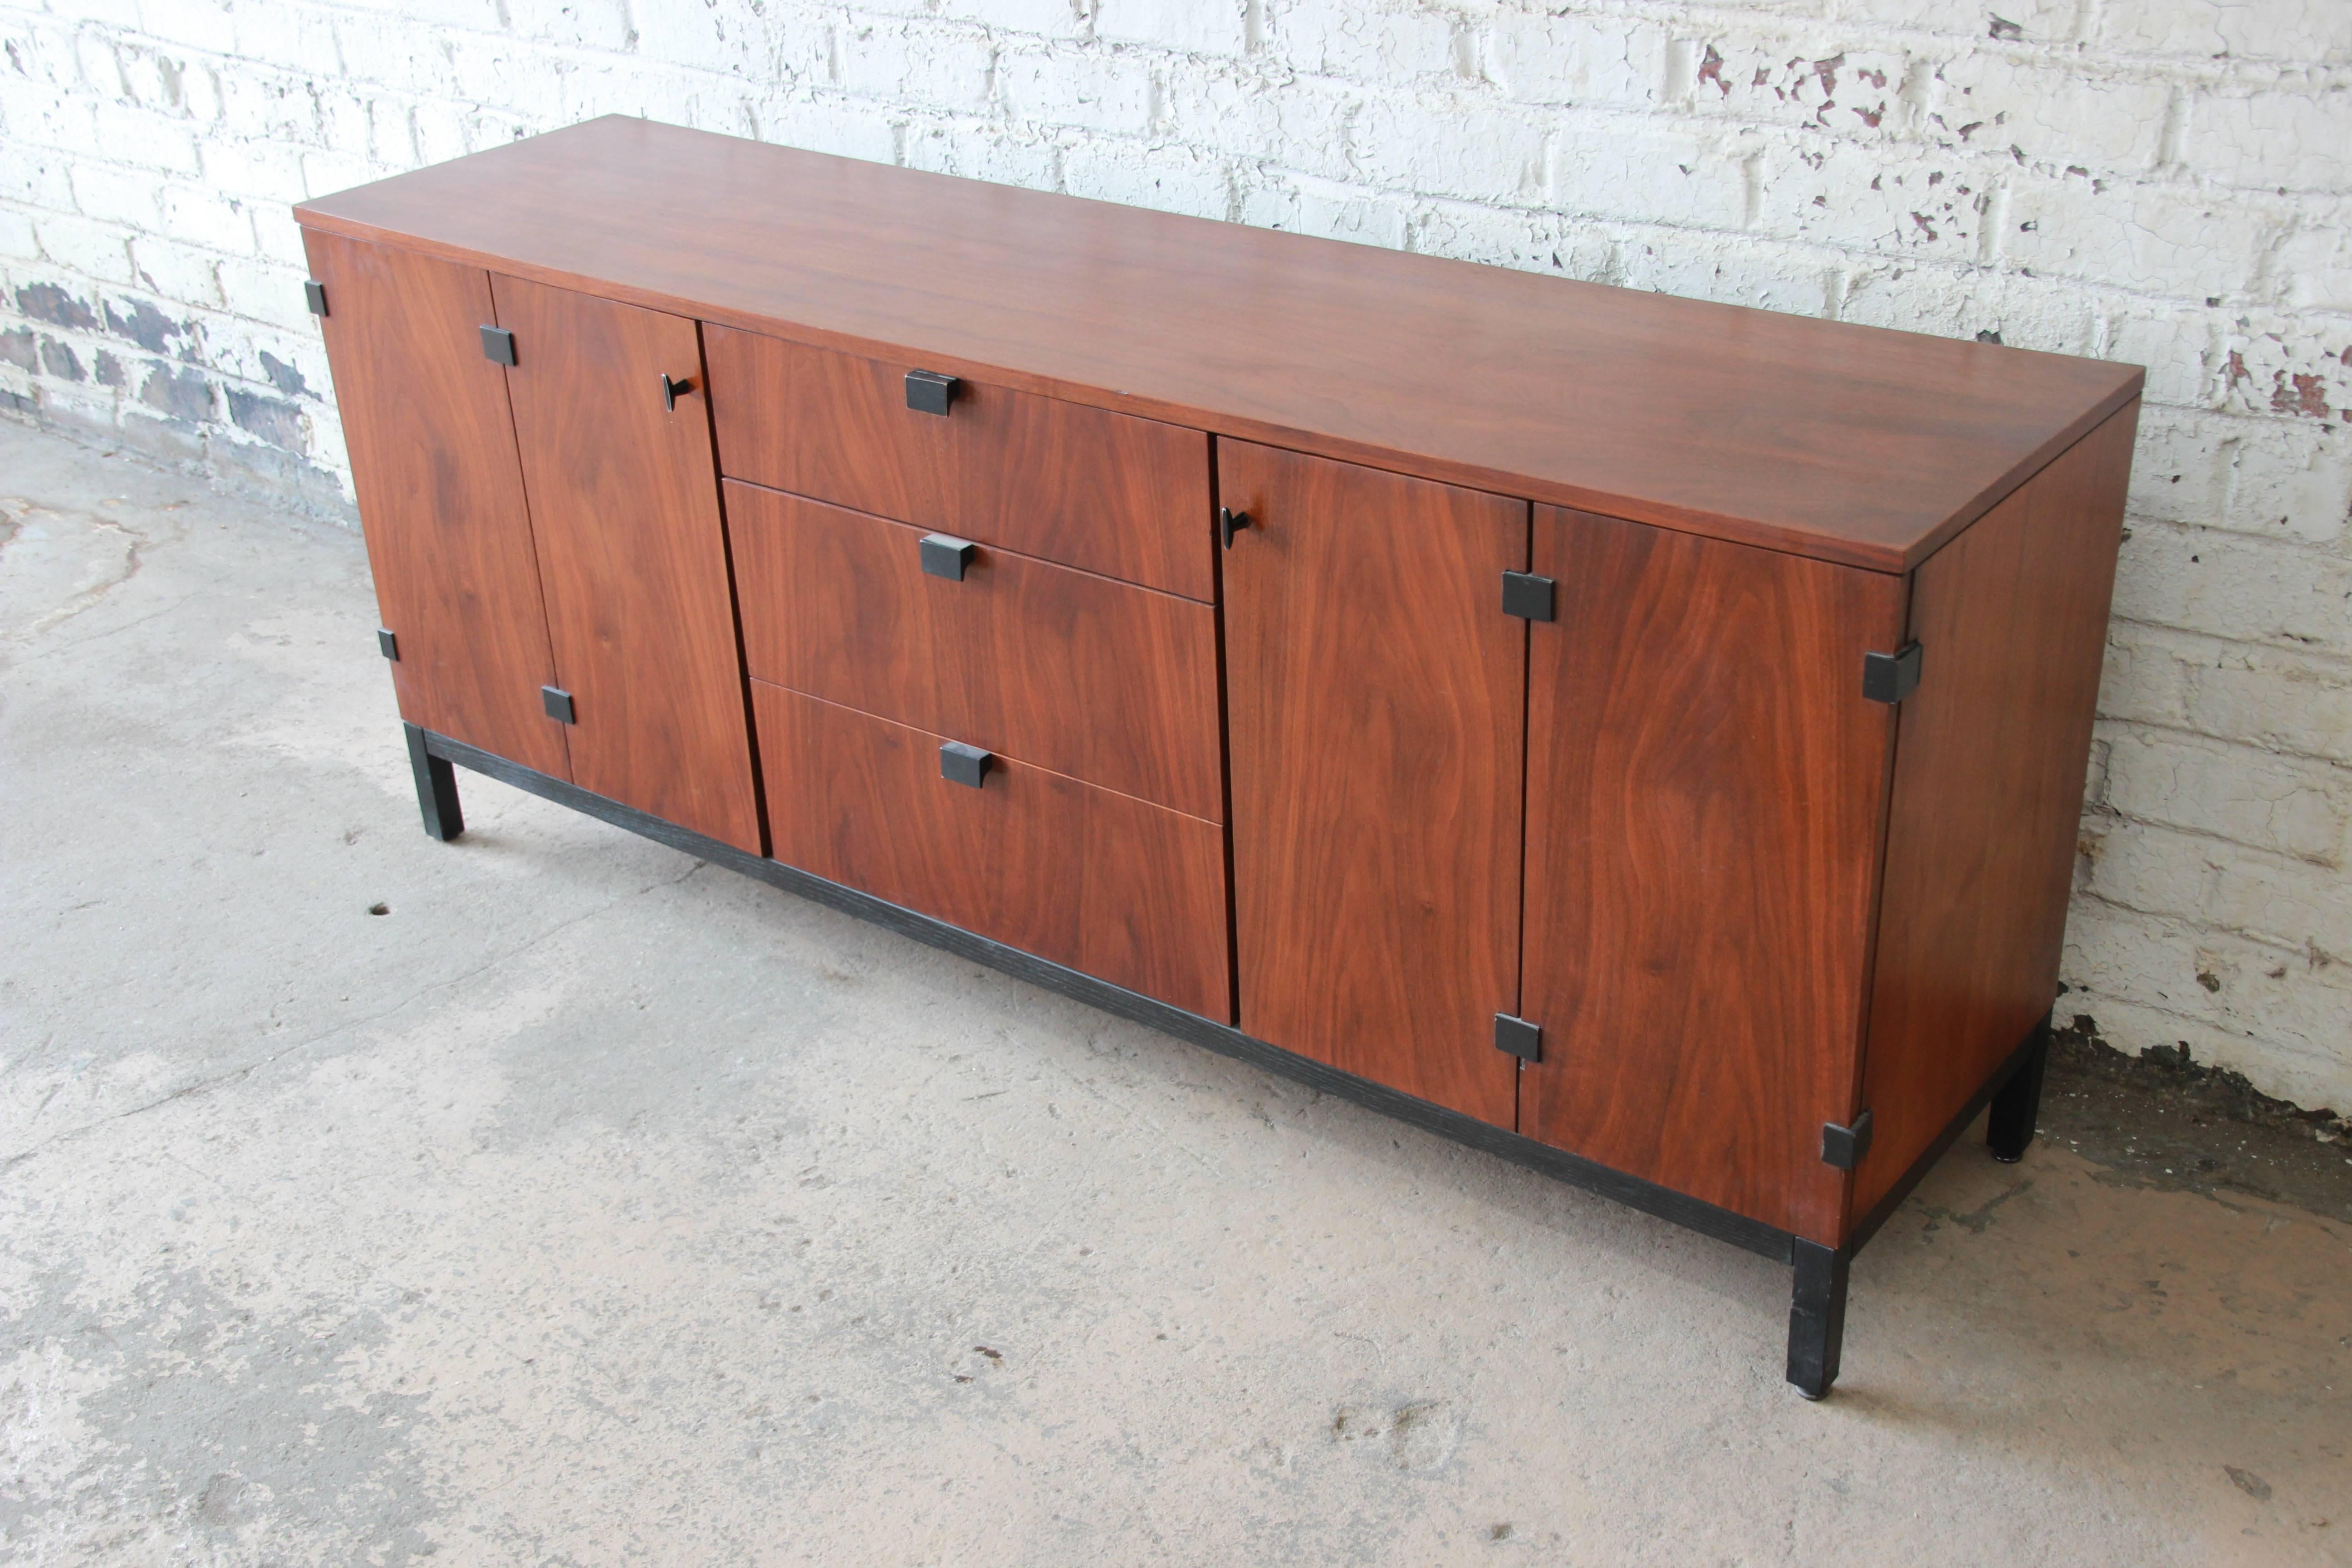 A stunning Mid-Century Modern walnut nine-drawer credenza or triple dresser designed by Kipp Stewart for Directional, circa 1960s. The credenza features gorgeous book-matched walnut wood grain, with sculpted ebonized pulls and an ebonized base. It